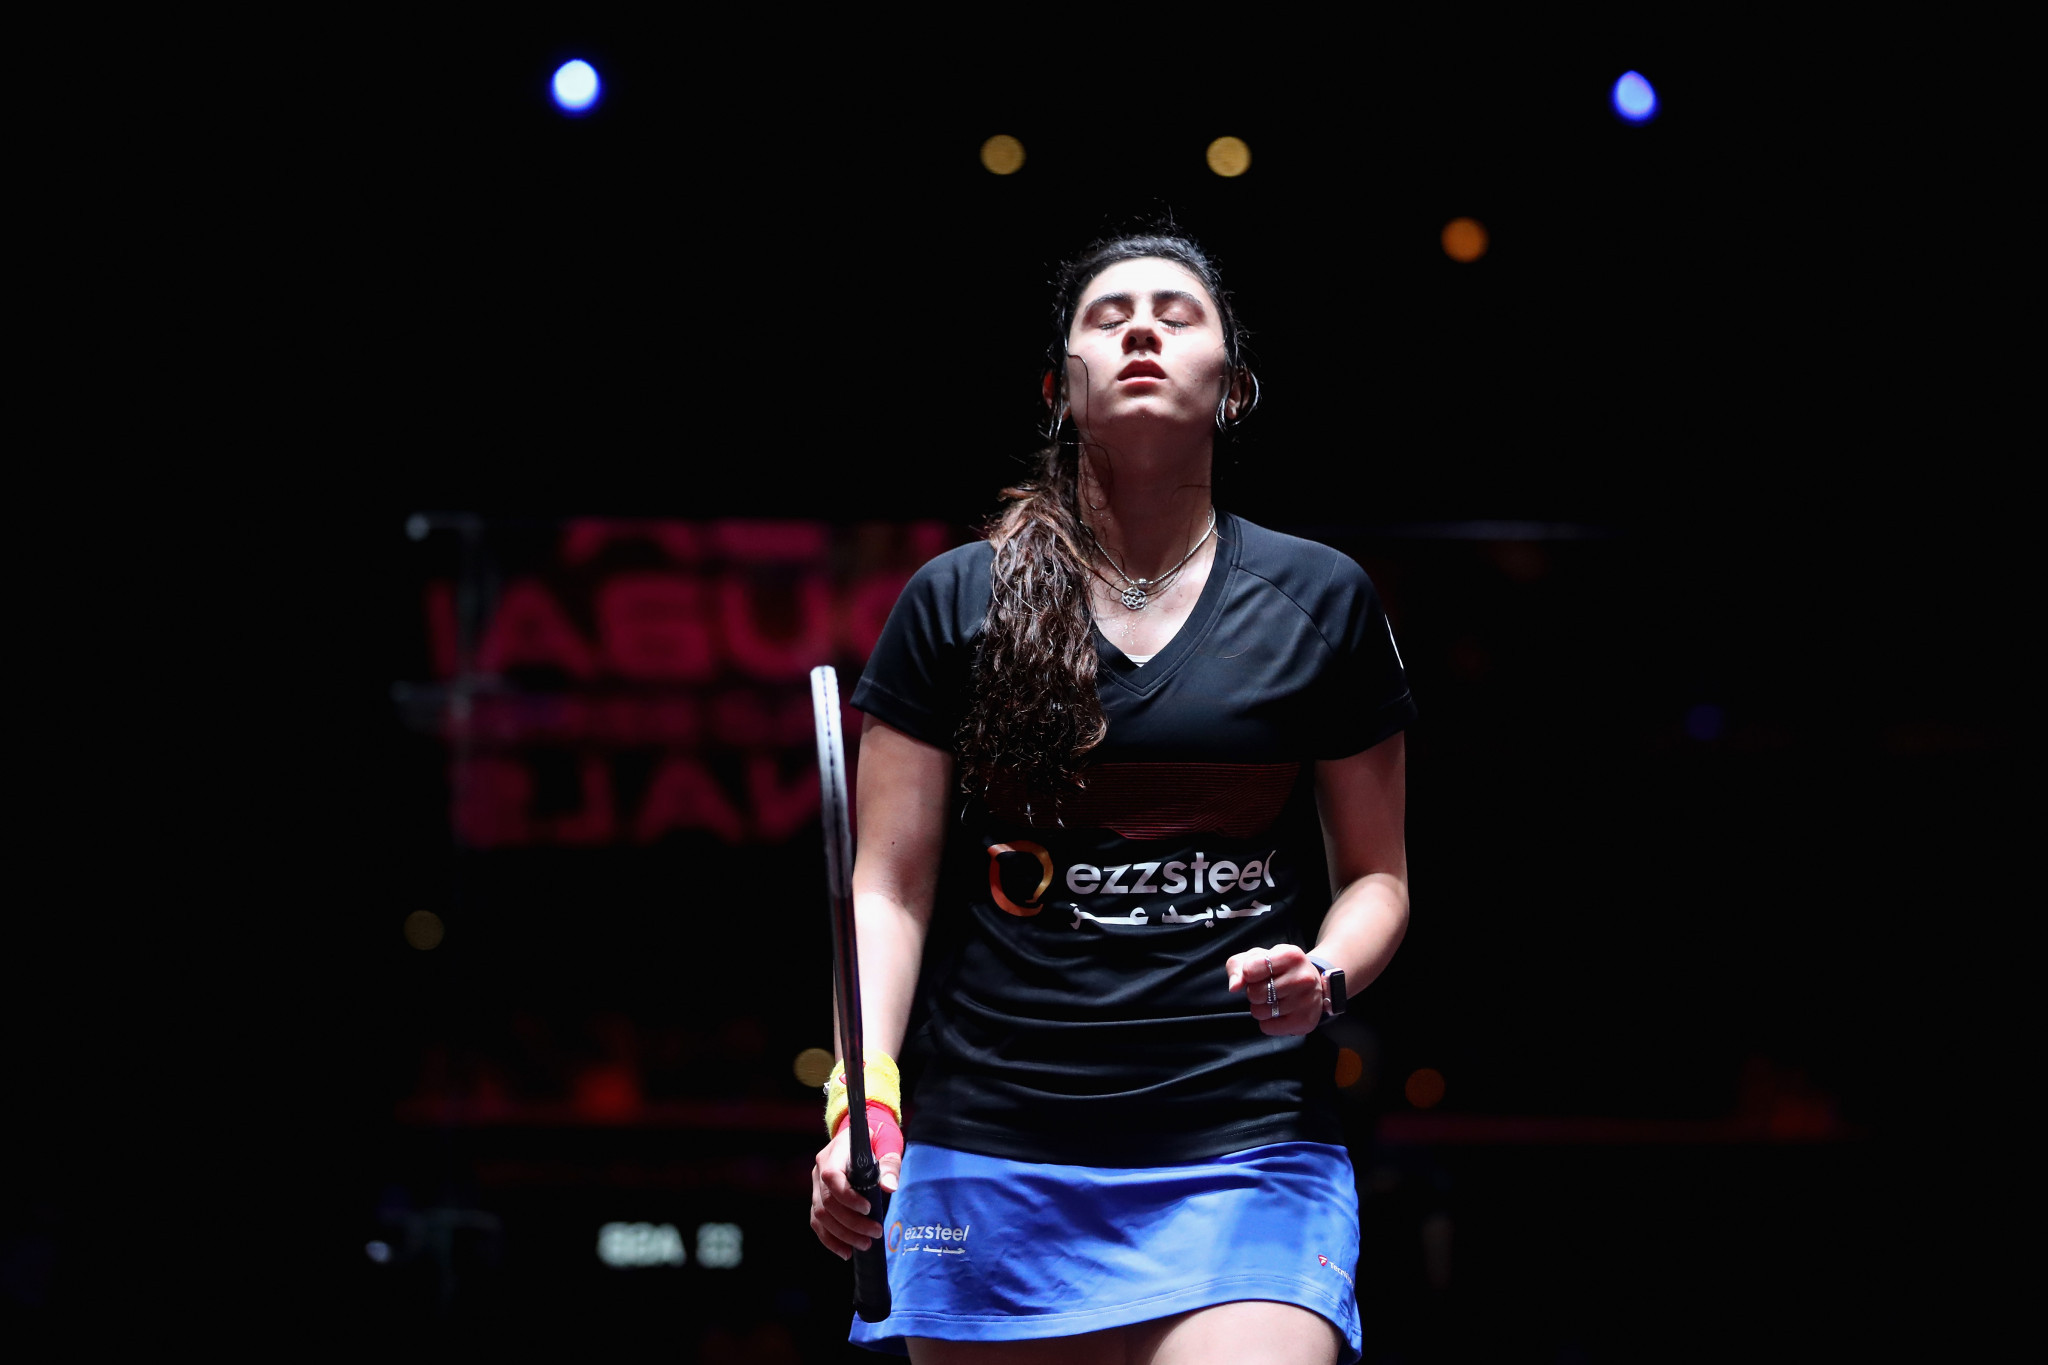 Women's second seed Nour El Sherbini enjoyed a comfortable straight games win in her quarter-final encounter ©Getty Images